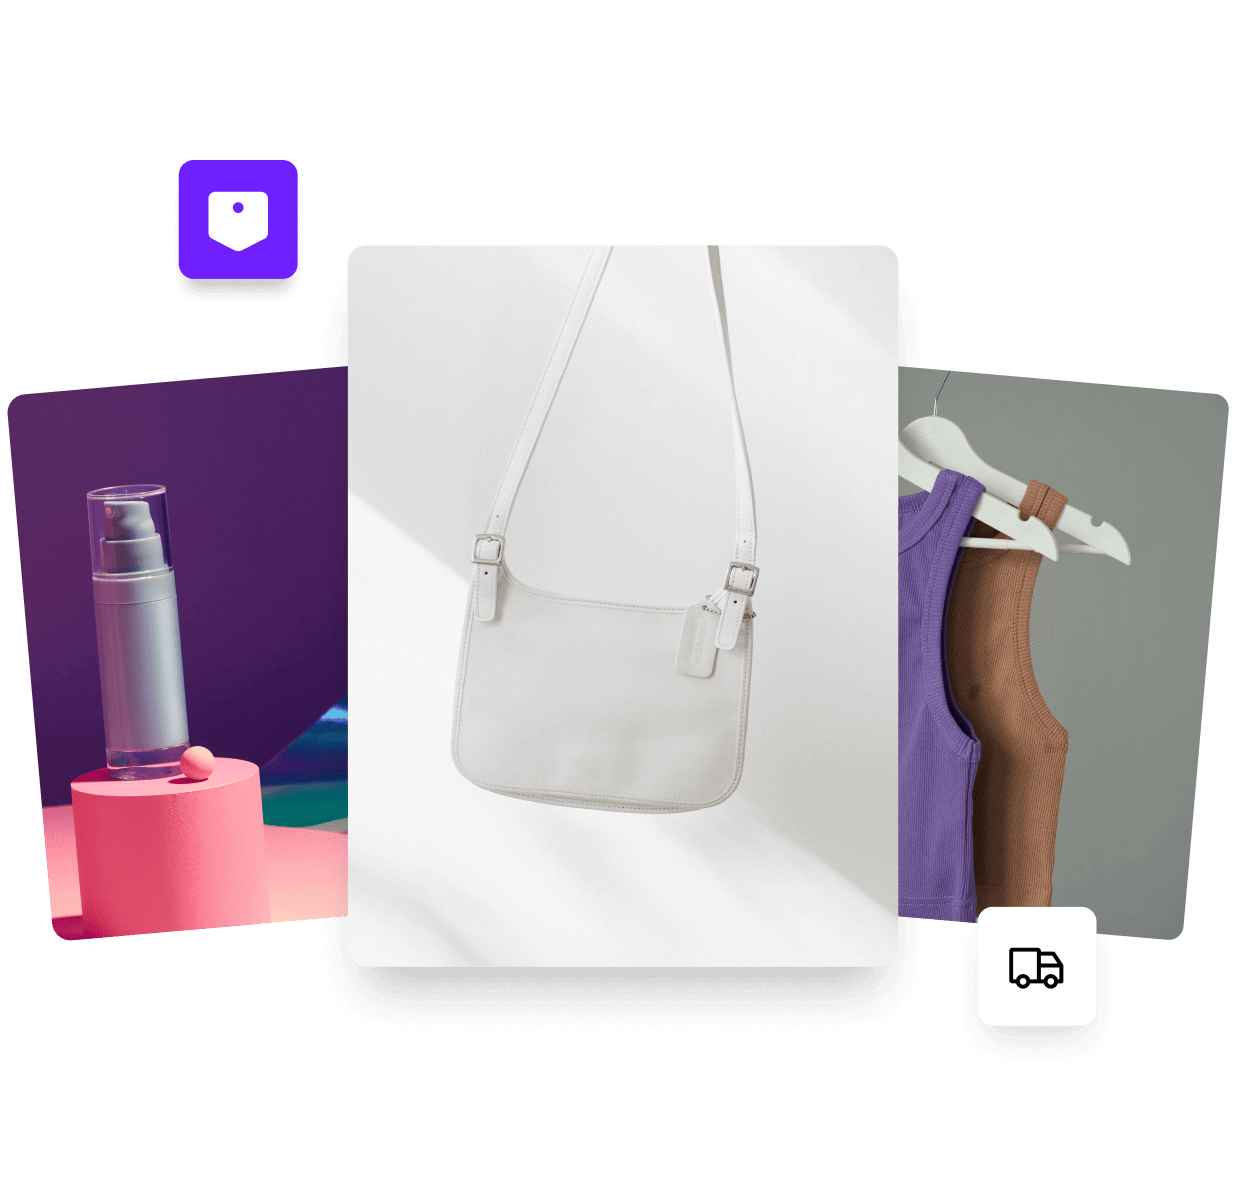 Three product photos featuring a cosmetics spray, a white leather purse, and two tank tops on hangers.